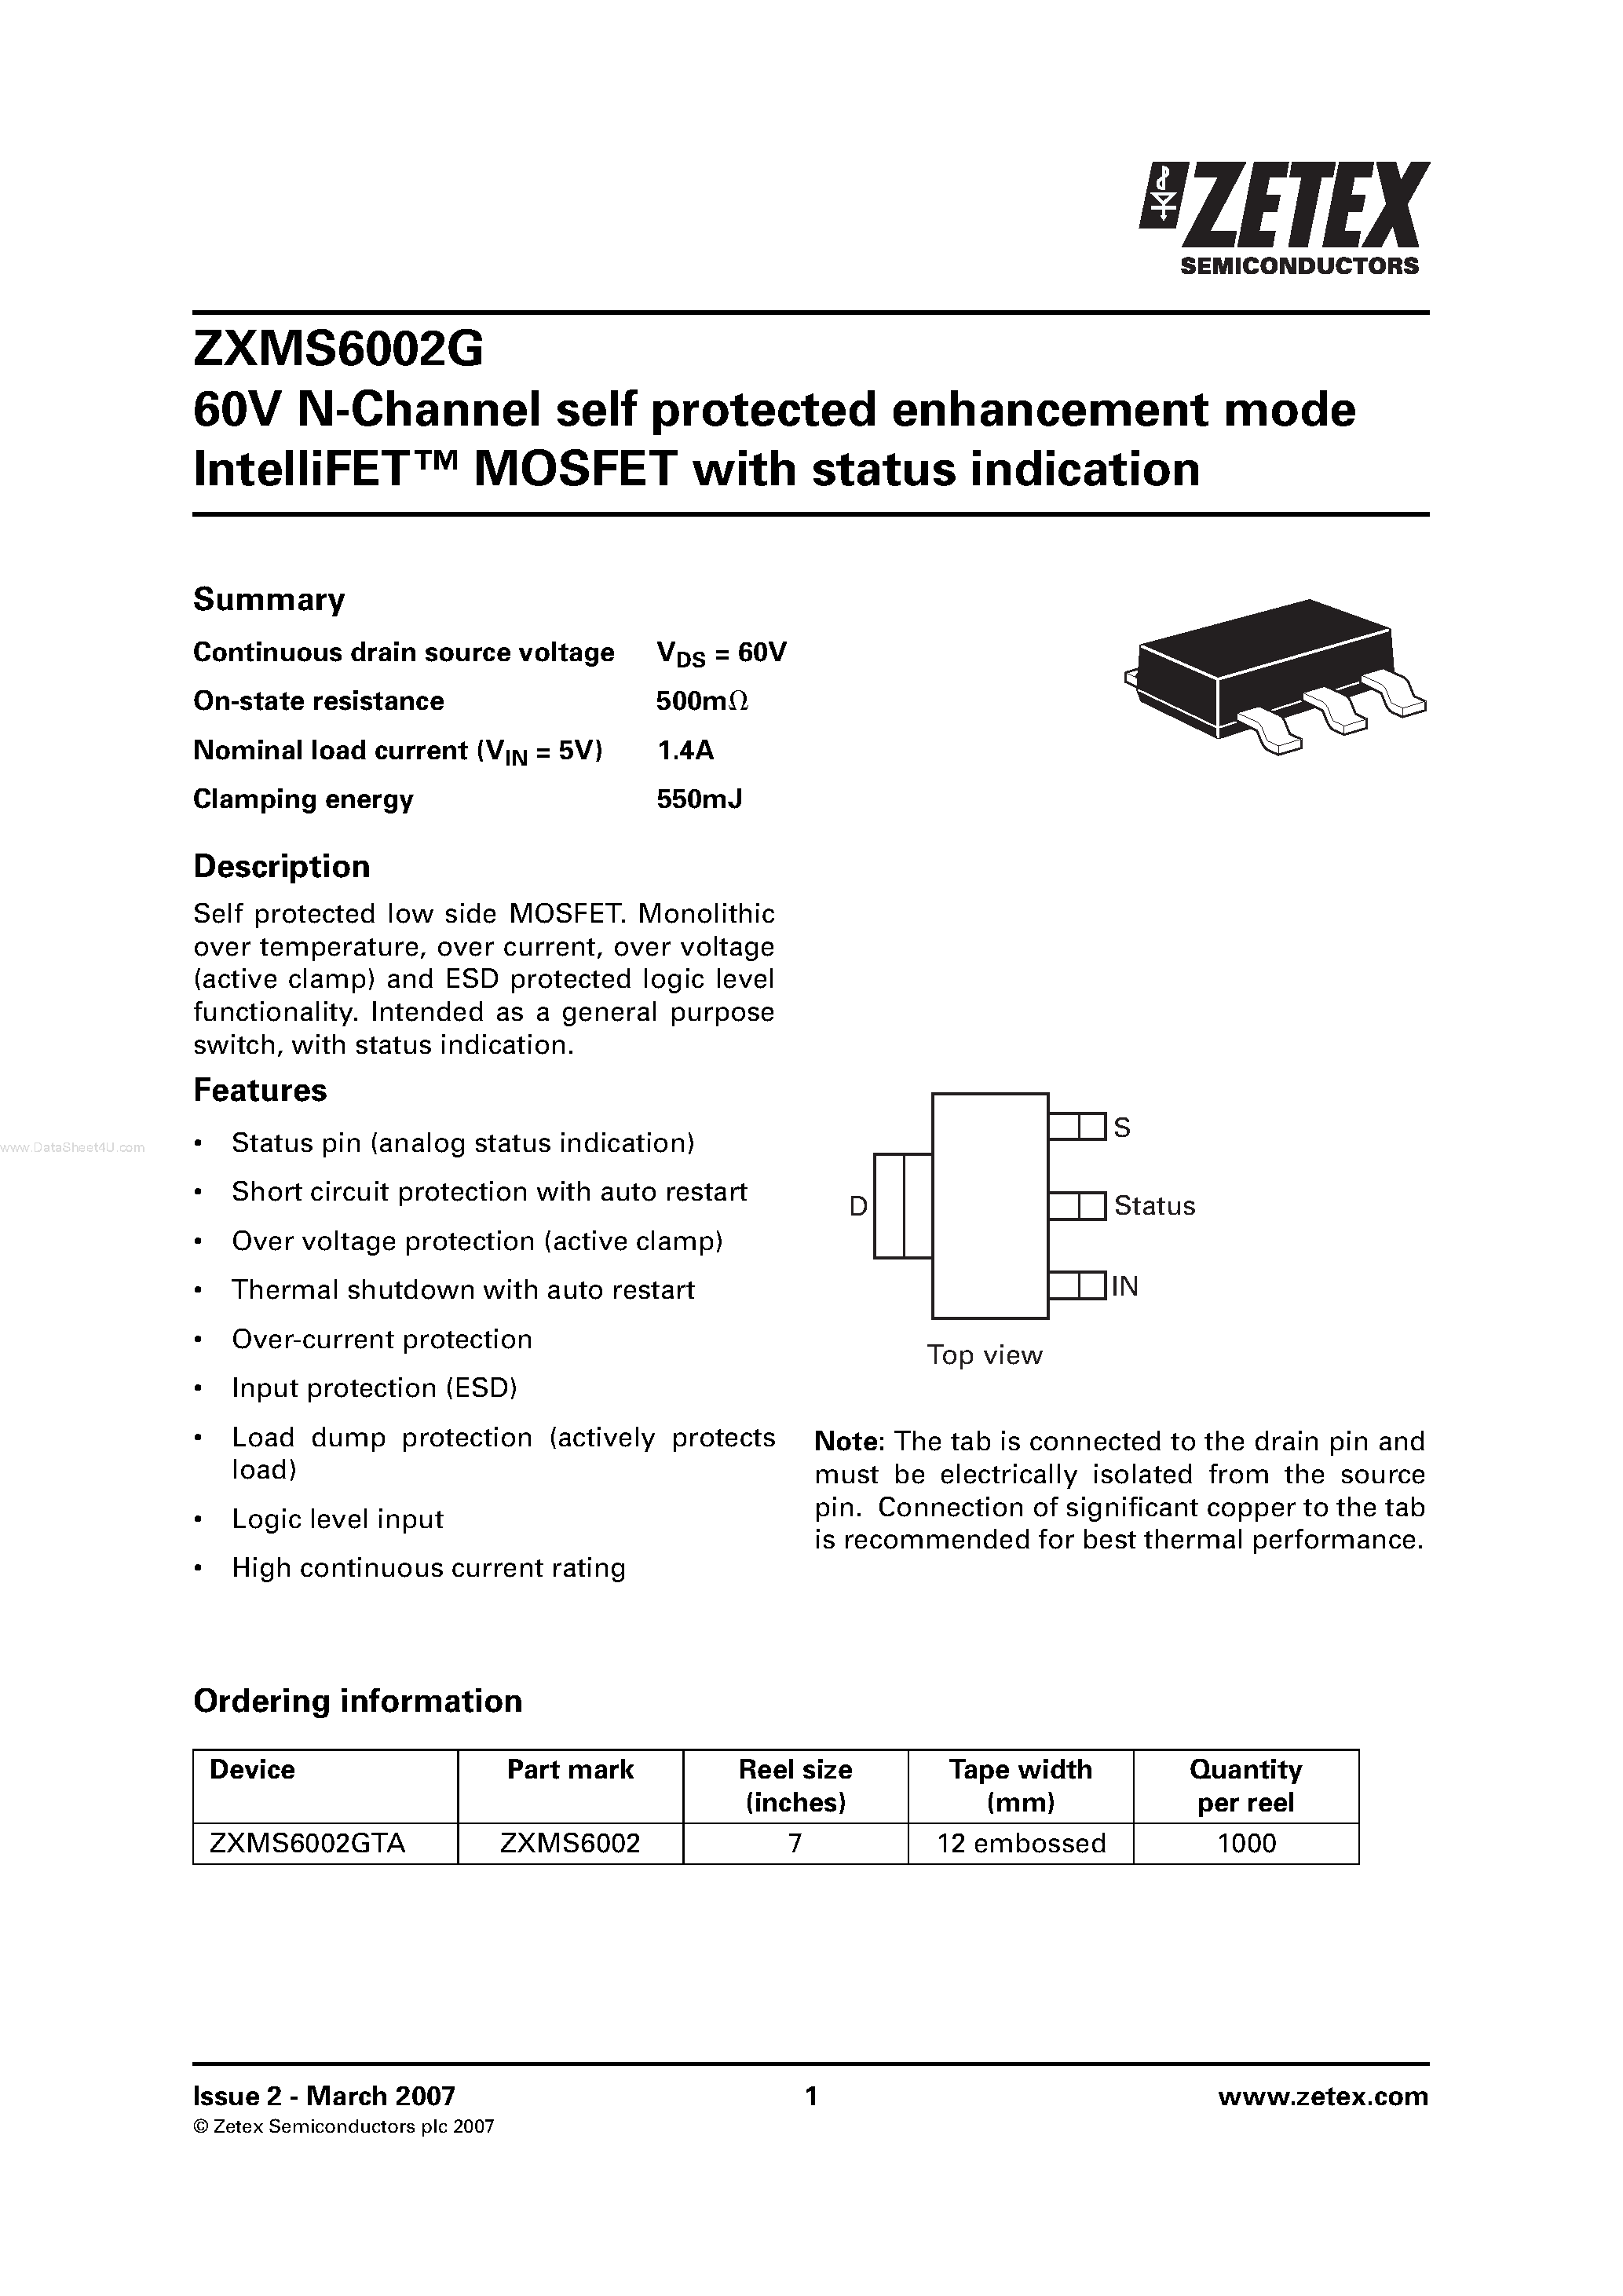 Datasheet ZXMS6002G - N-Channel self protected enhancement mode IntelliFET MOSFET page 1